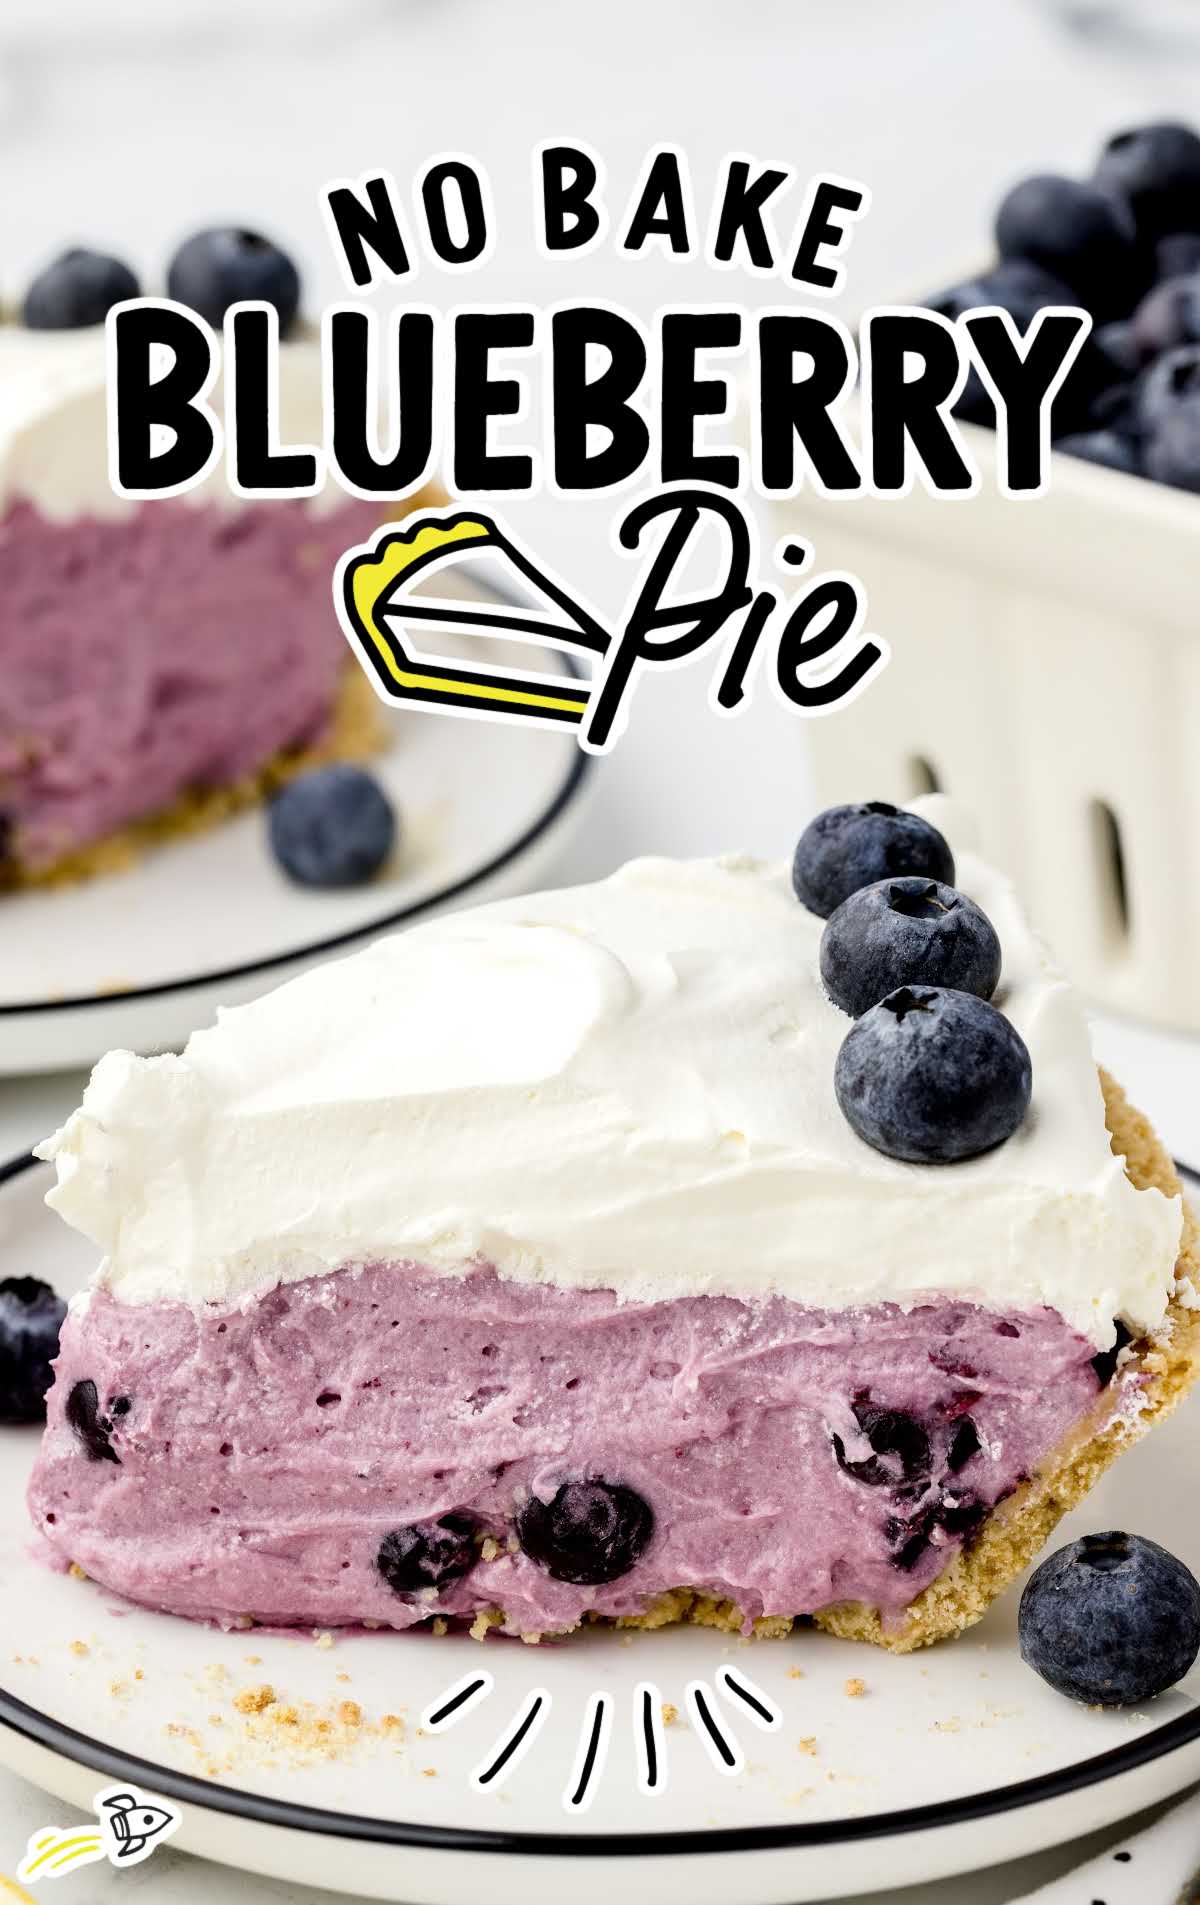 a close up shot of a slice of No Bake Blueberry Pie on a plate